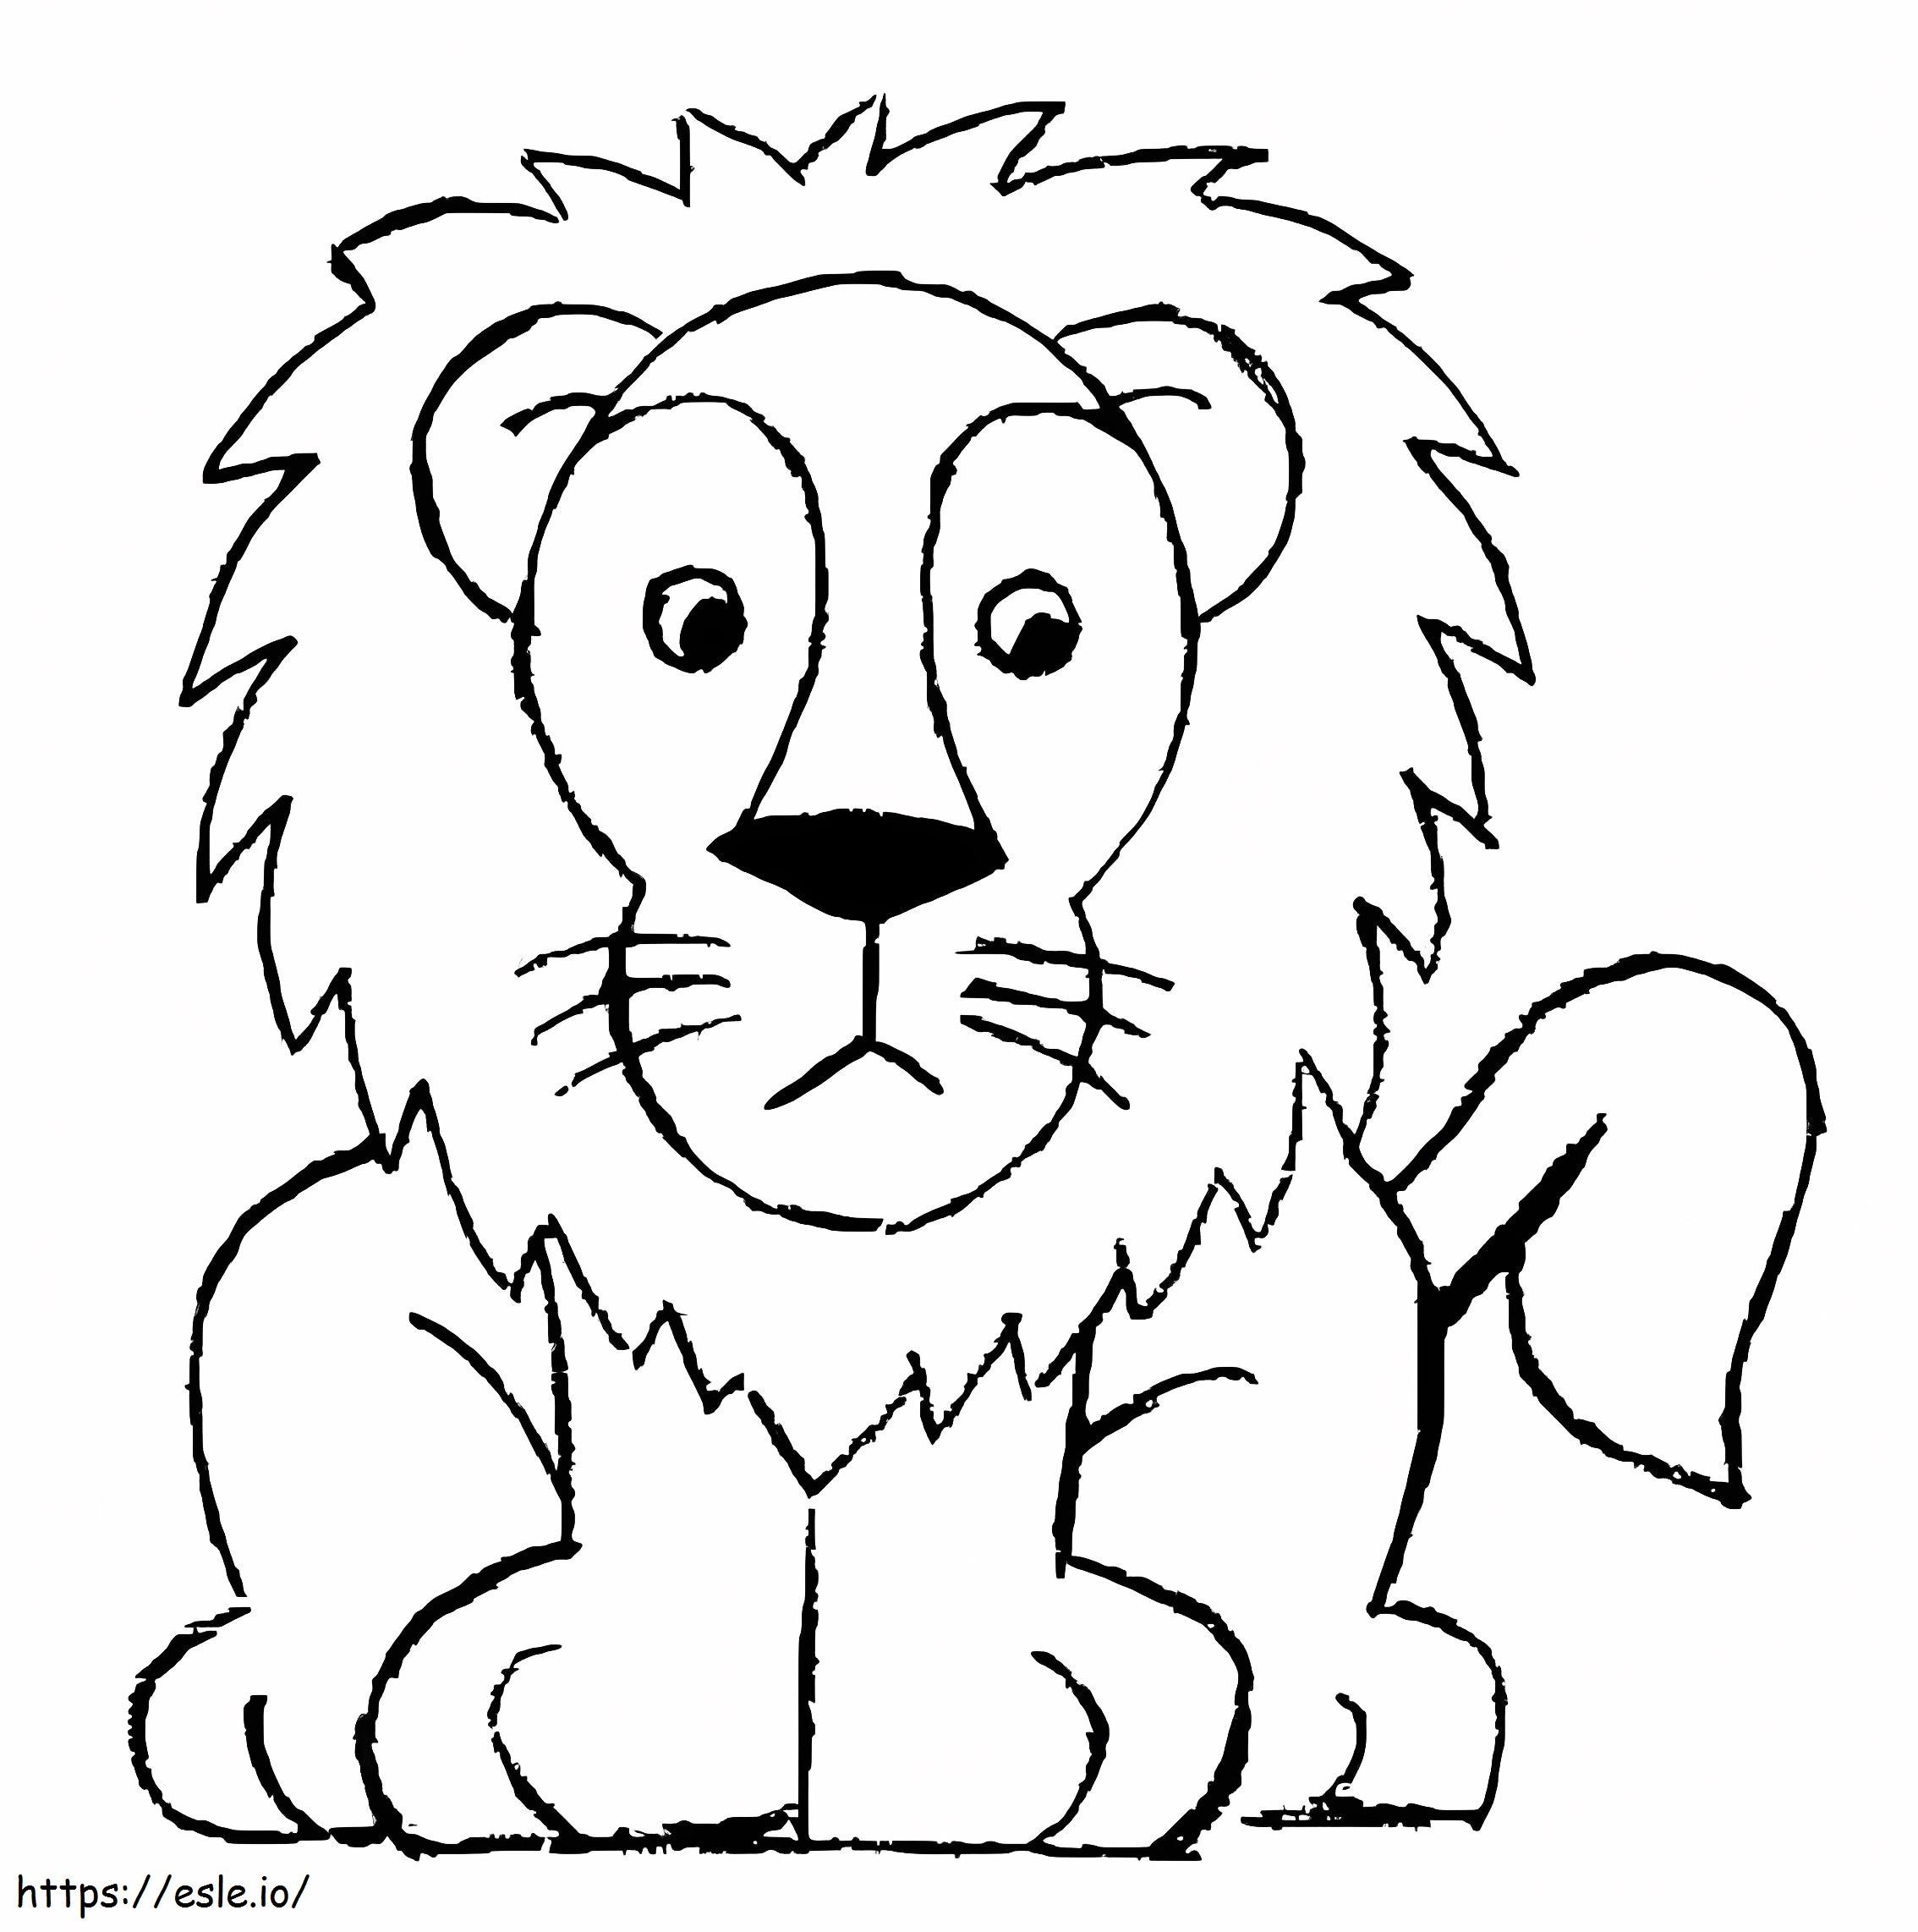 Easy Lion Sketch coloring page